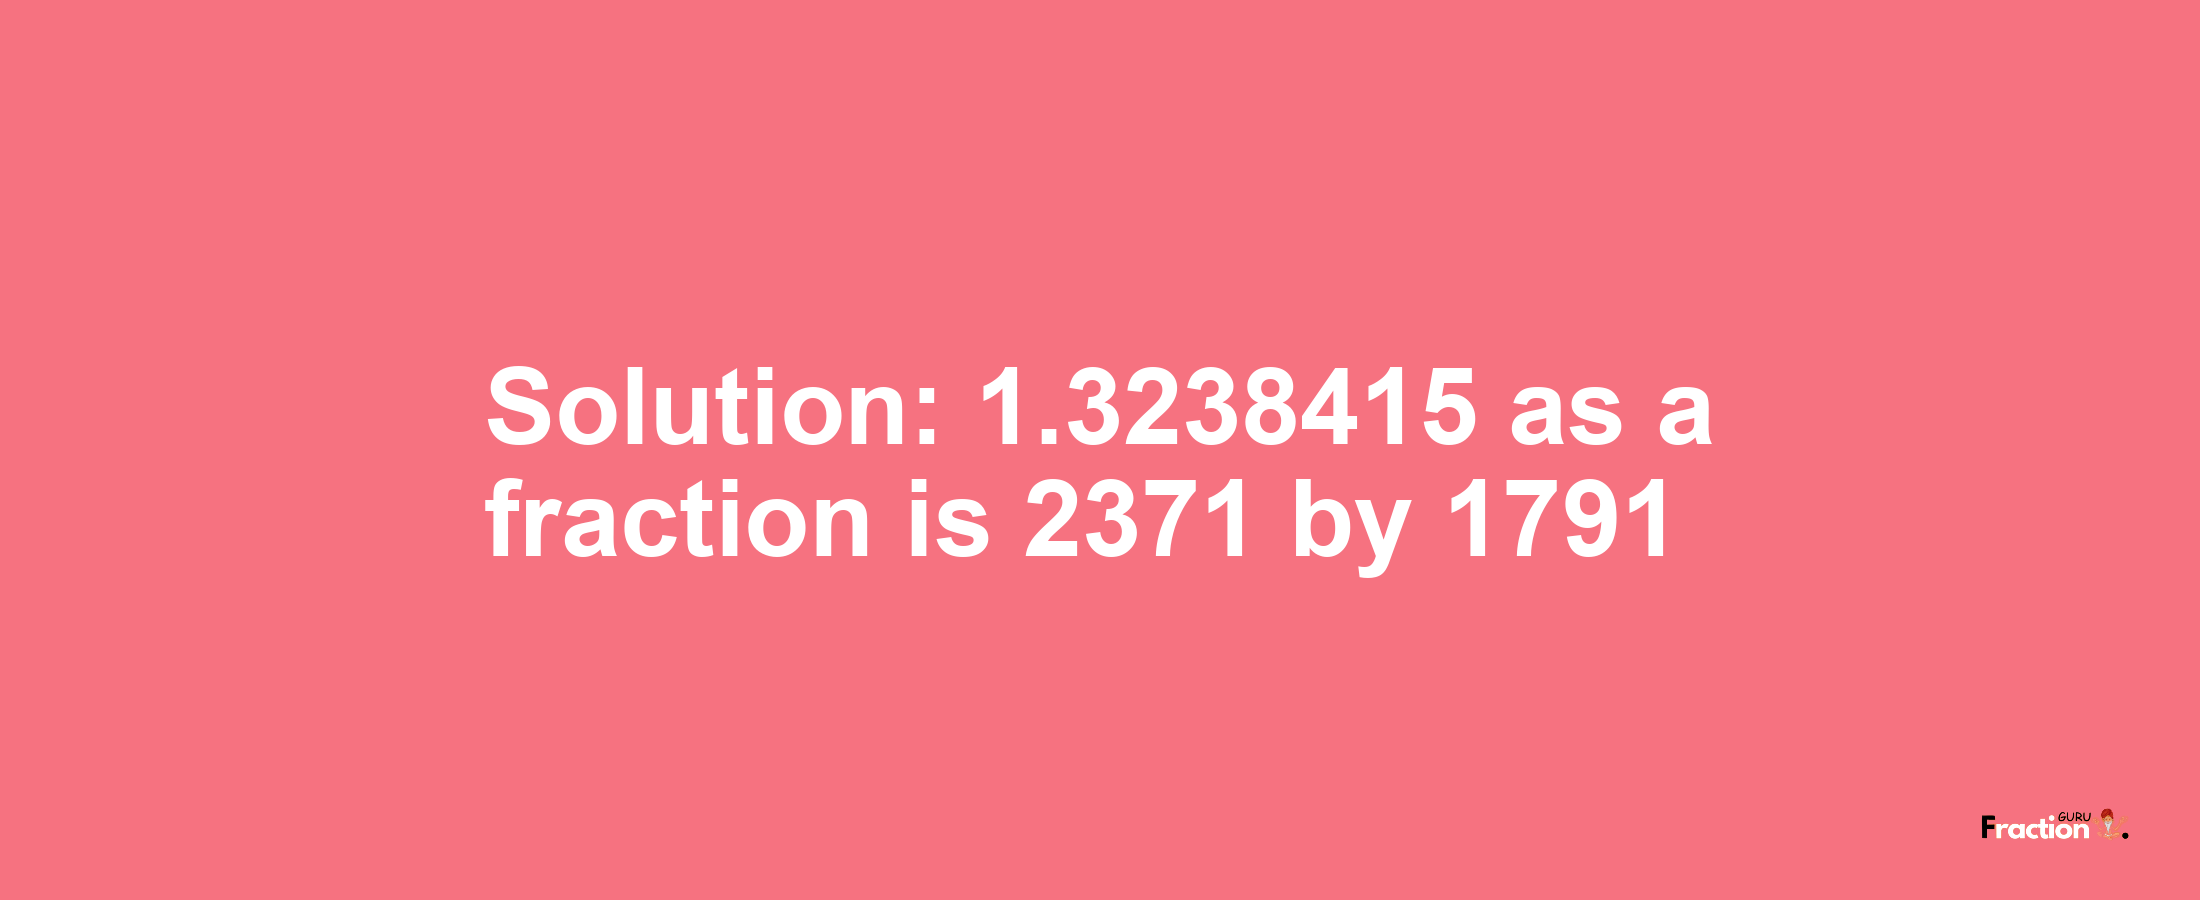 Solution:1.3238415 as a fraction is 2371/1791